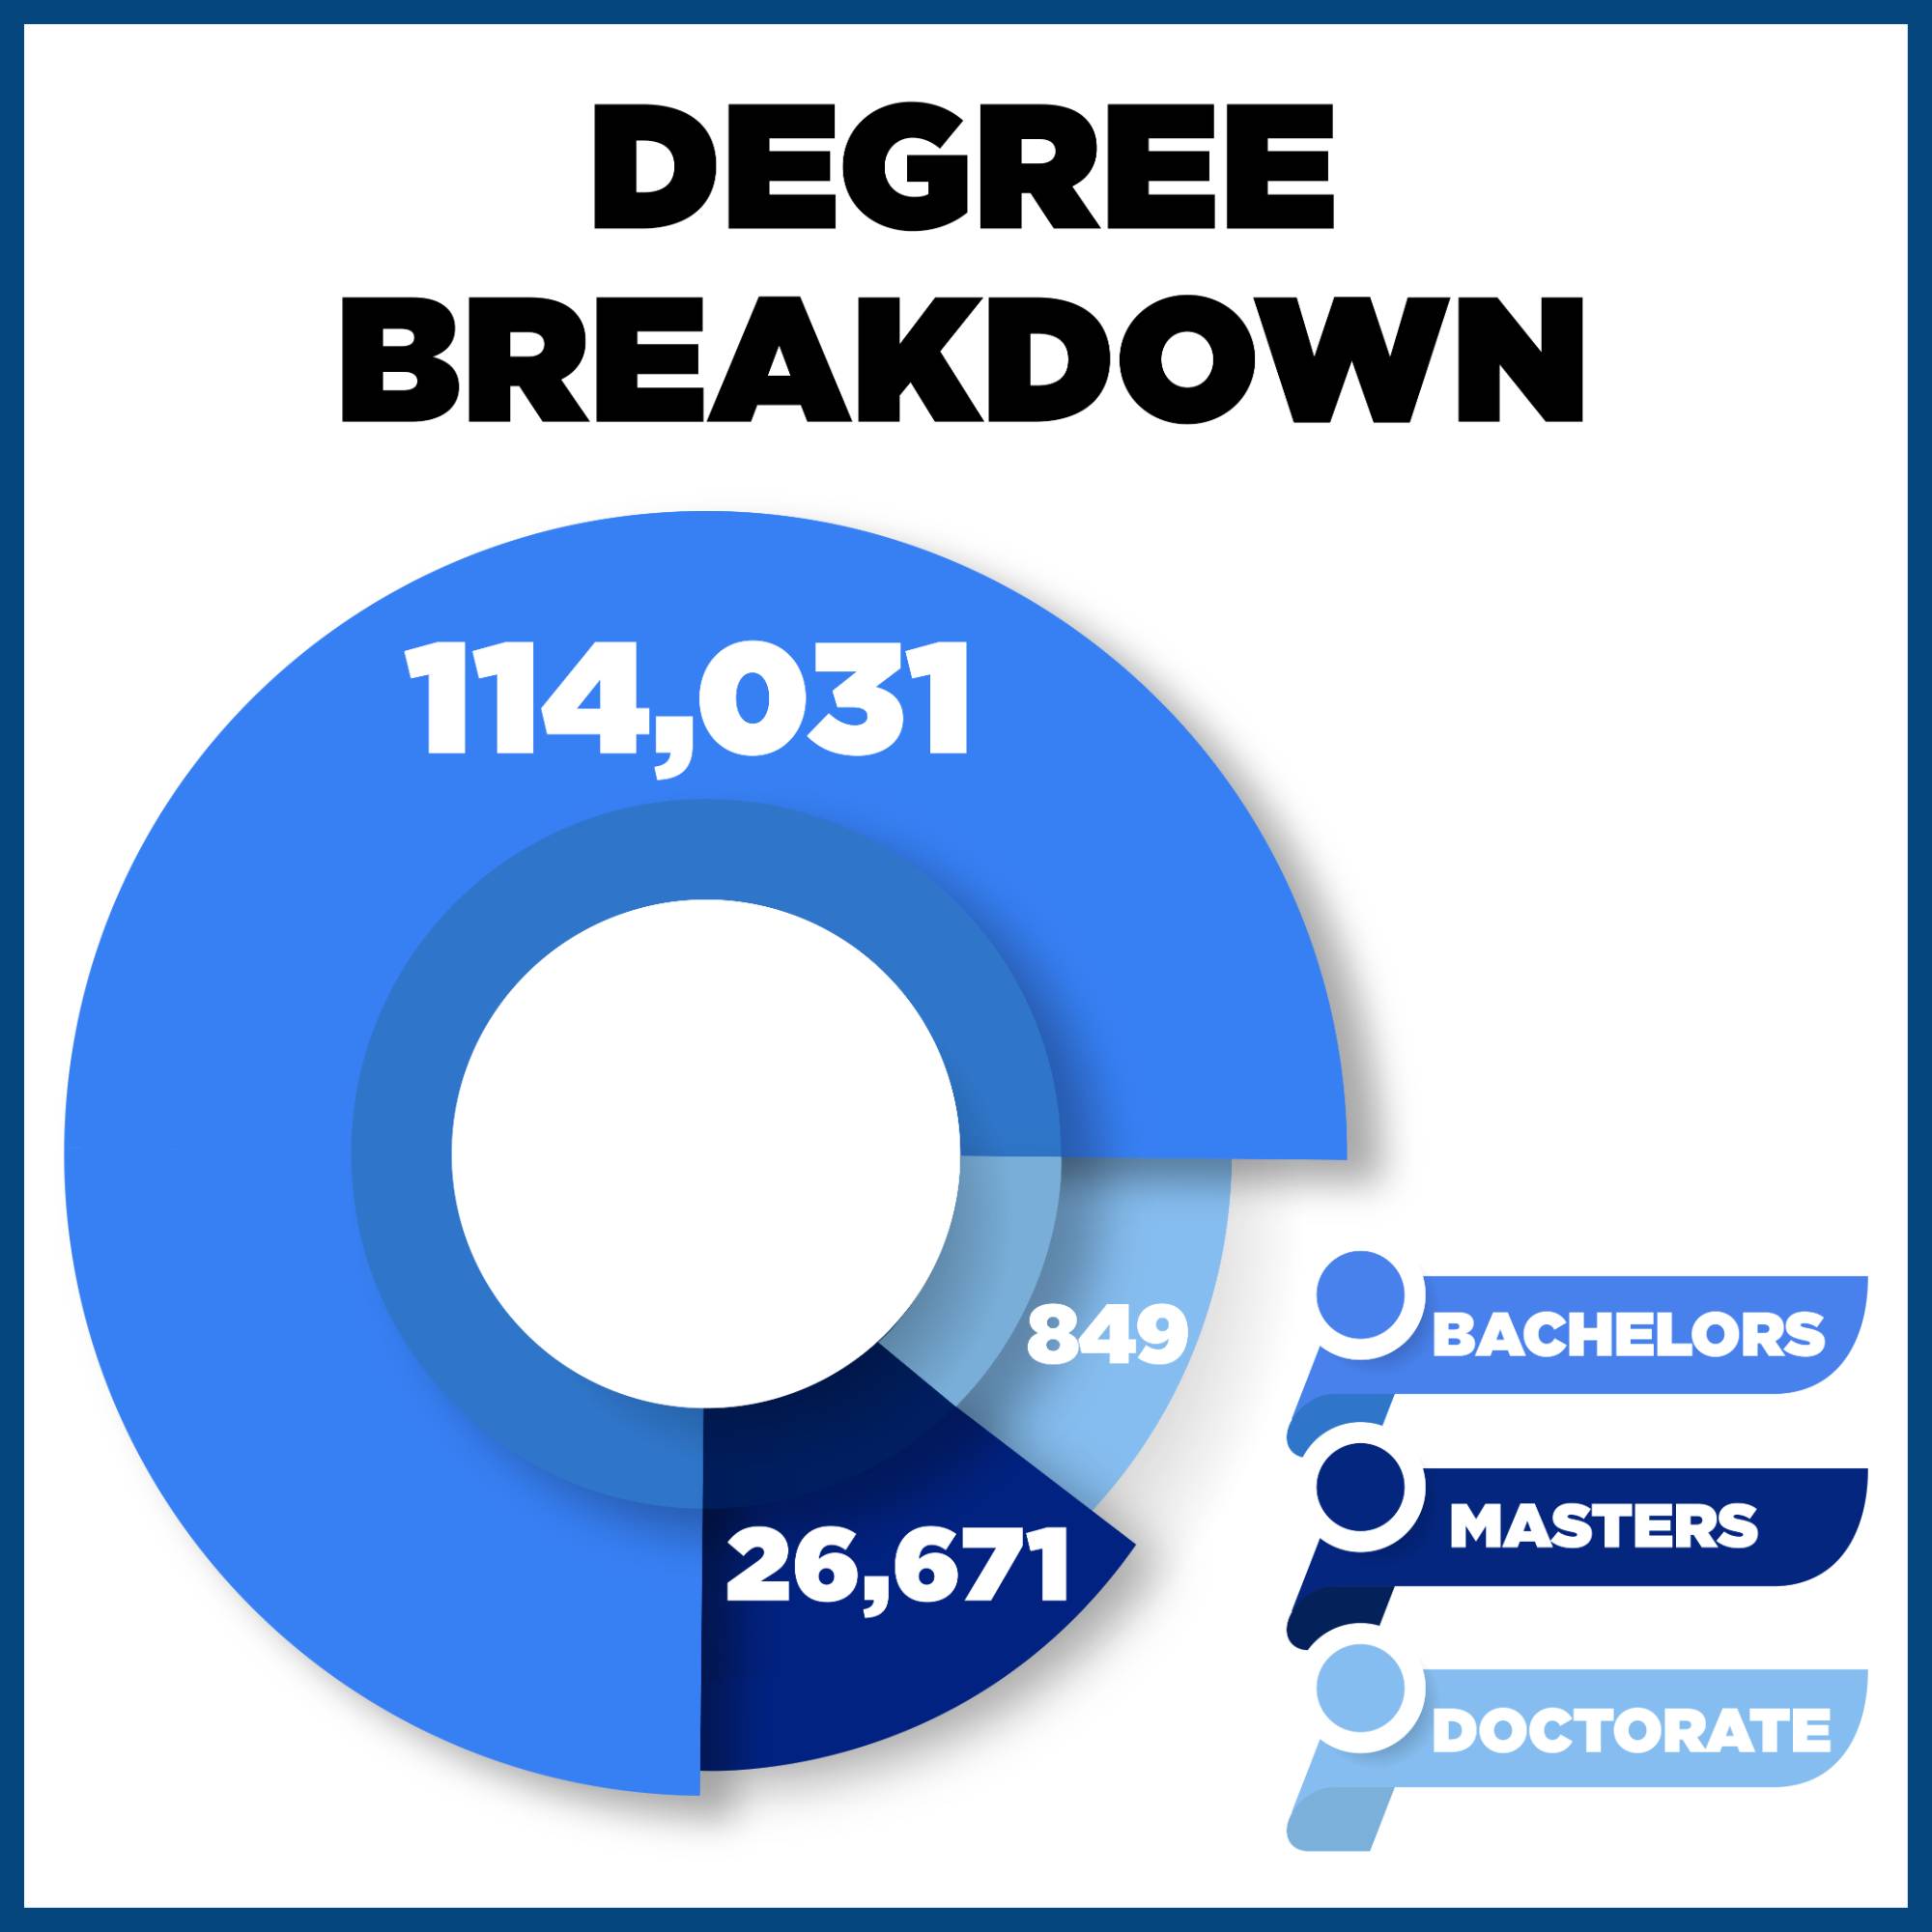 A pie chart breaks down the types of degrees awarded which include: 114,031 Bachelors degrees awarded, 26,671 Masters degrees awarded, and 849 Doctorate degrees awarded.